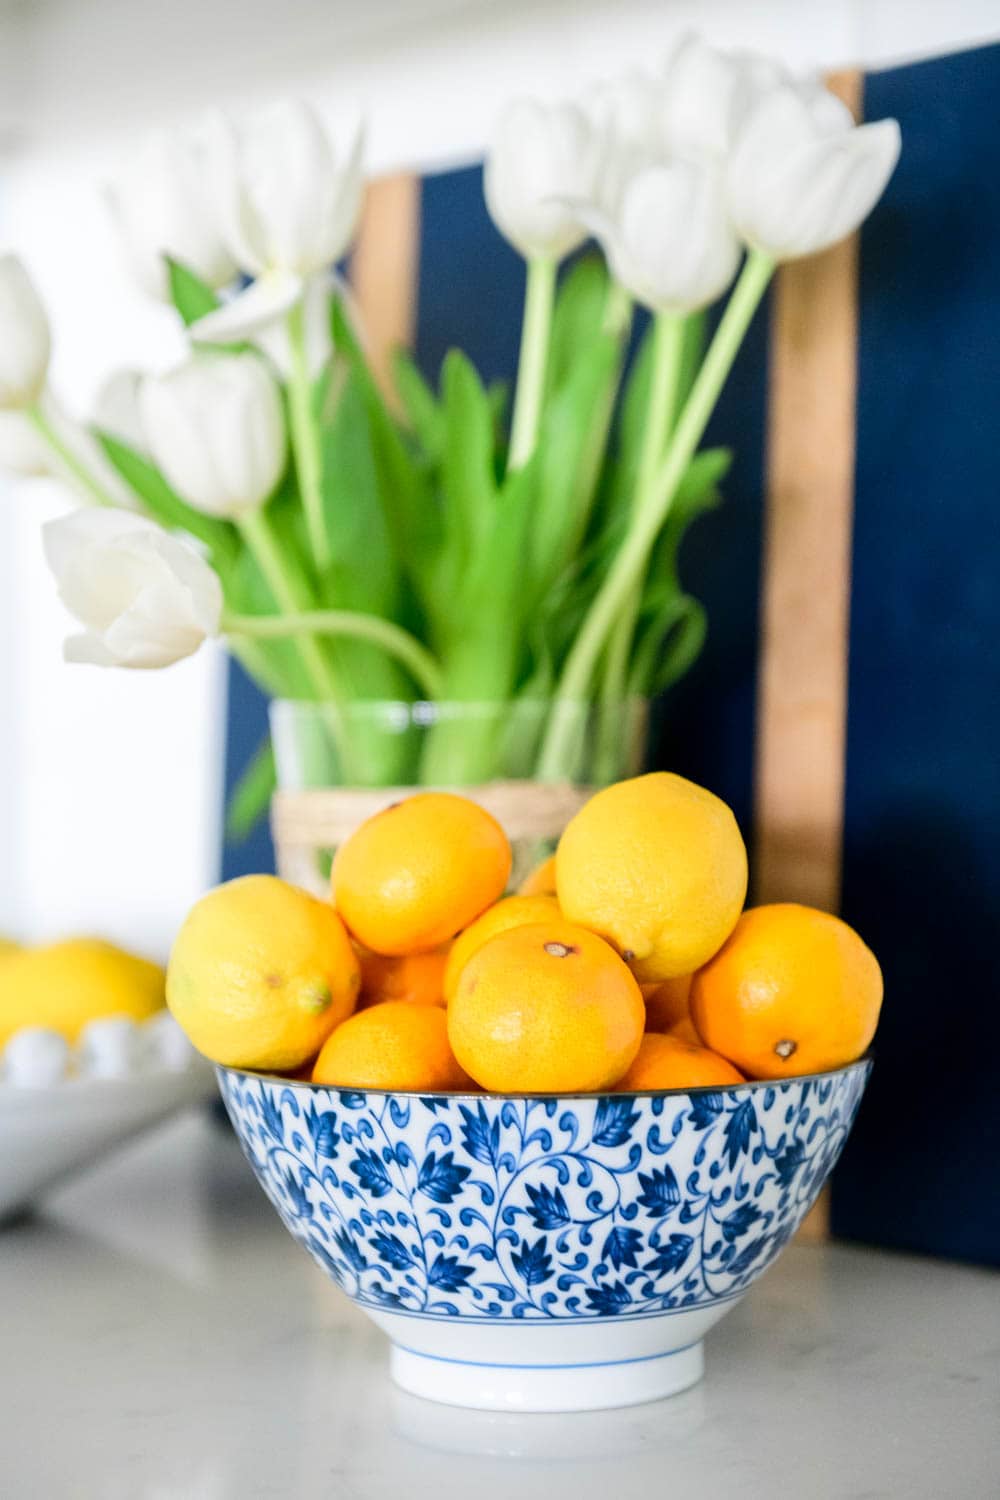 Add a bowl of fruit for color, blue and white bowl, tulips, cutting boards. #ABlissfulNest #kitchendecor #whitekitchen